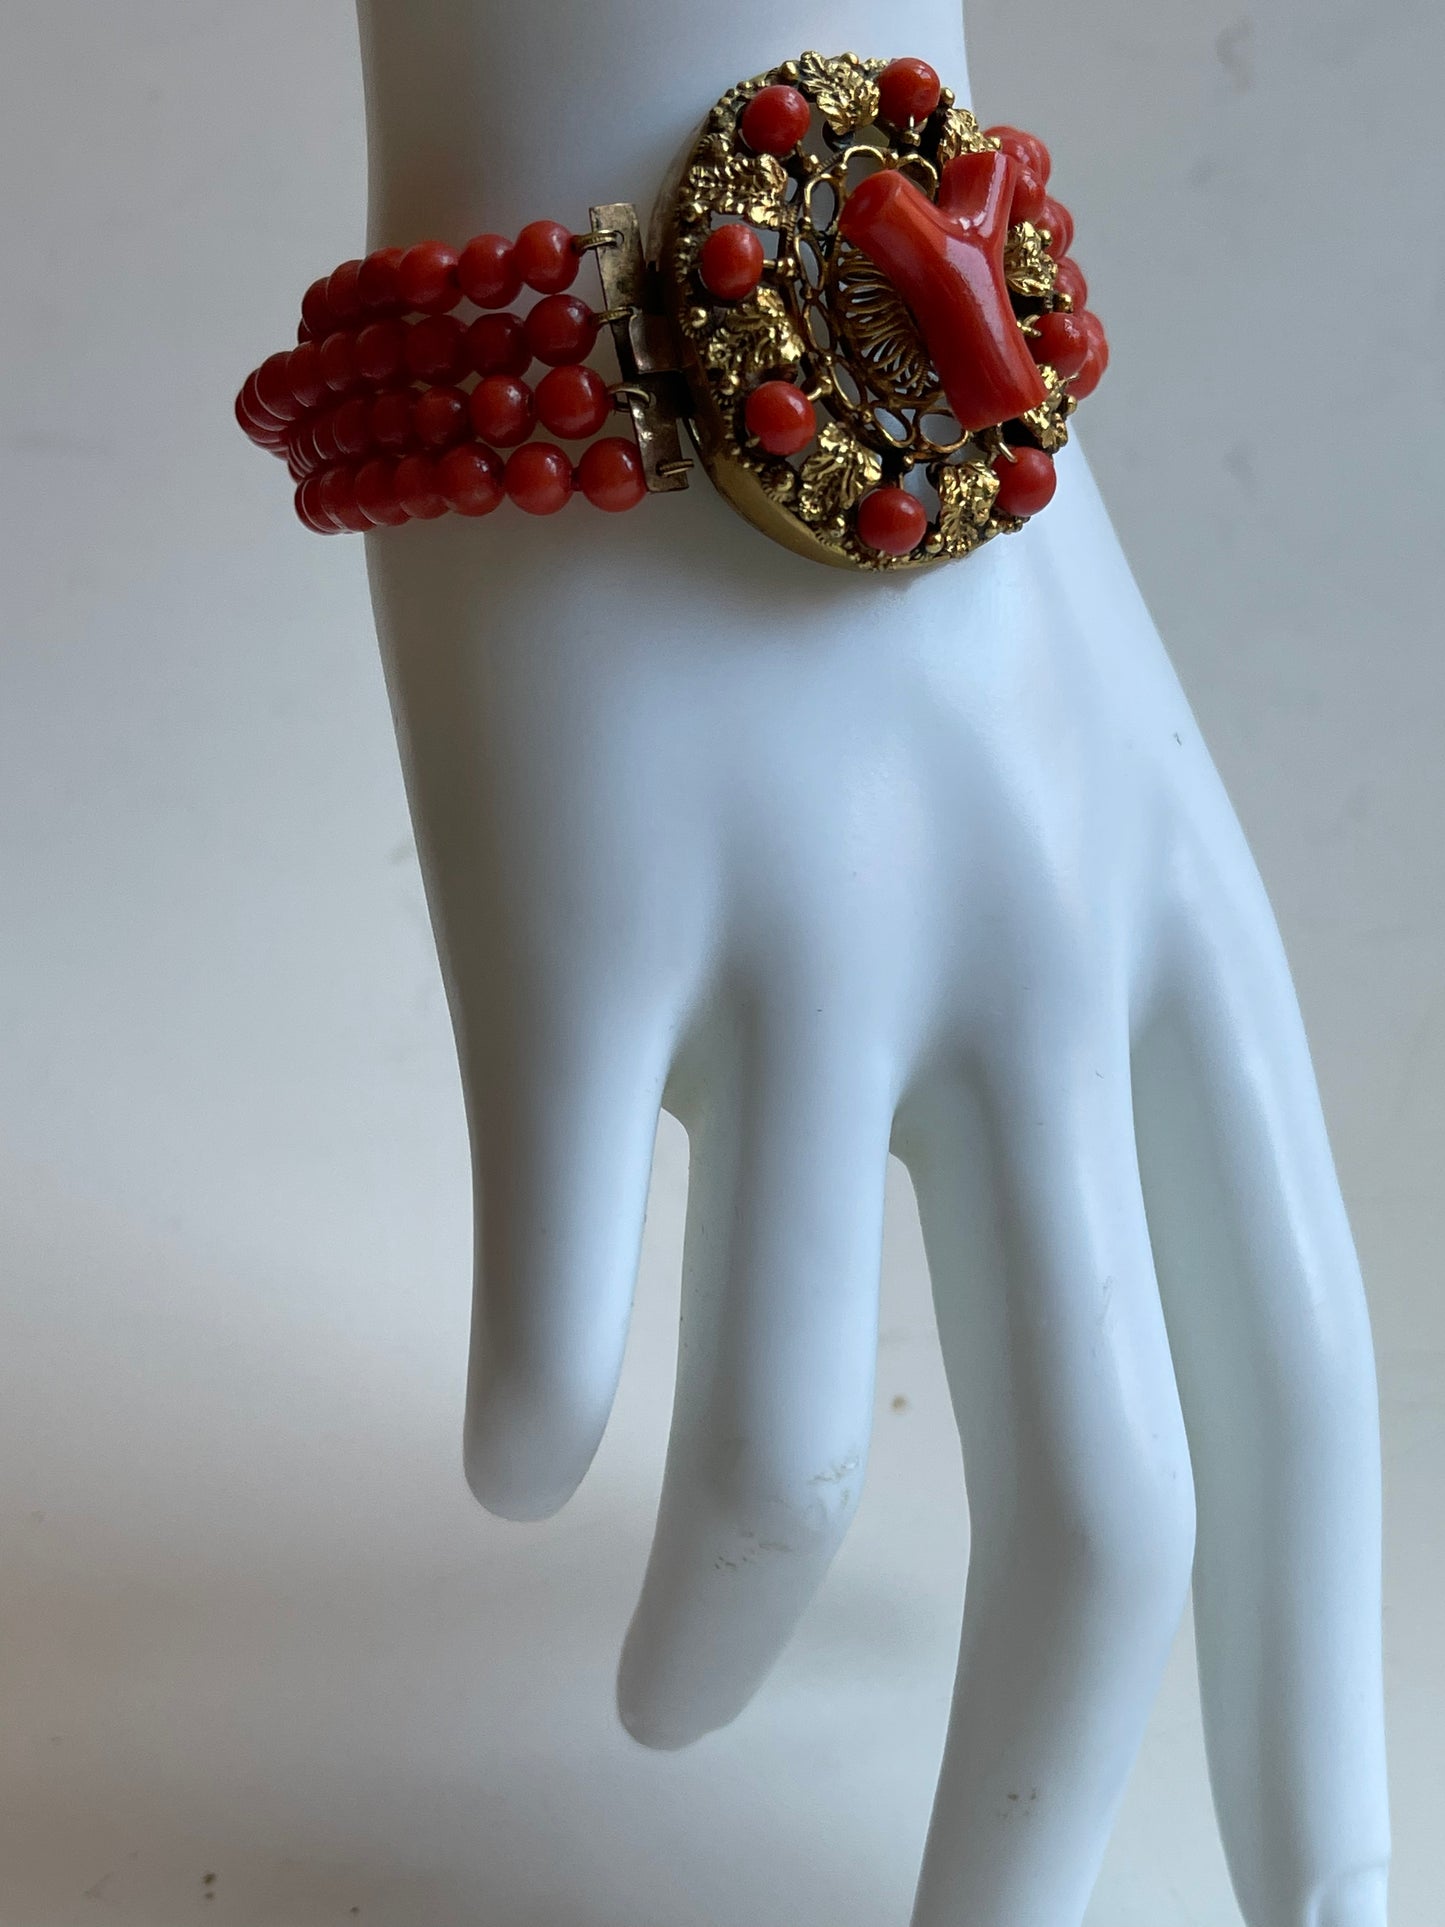 An antique coral bracelet with 4 strings of coral